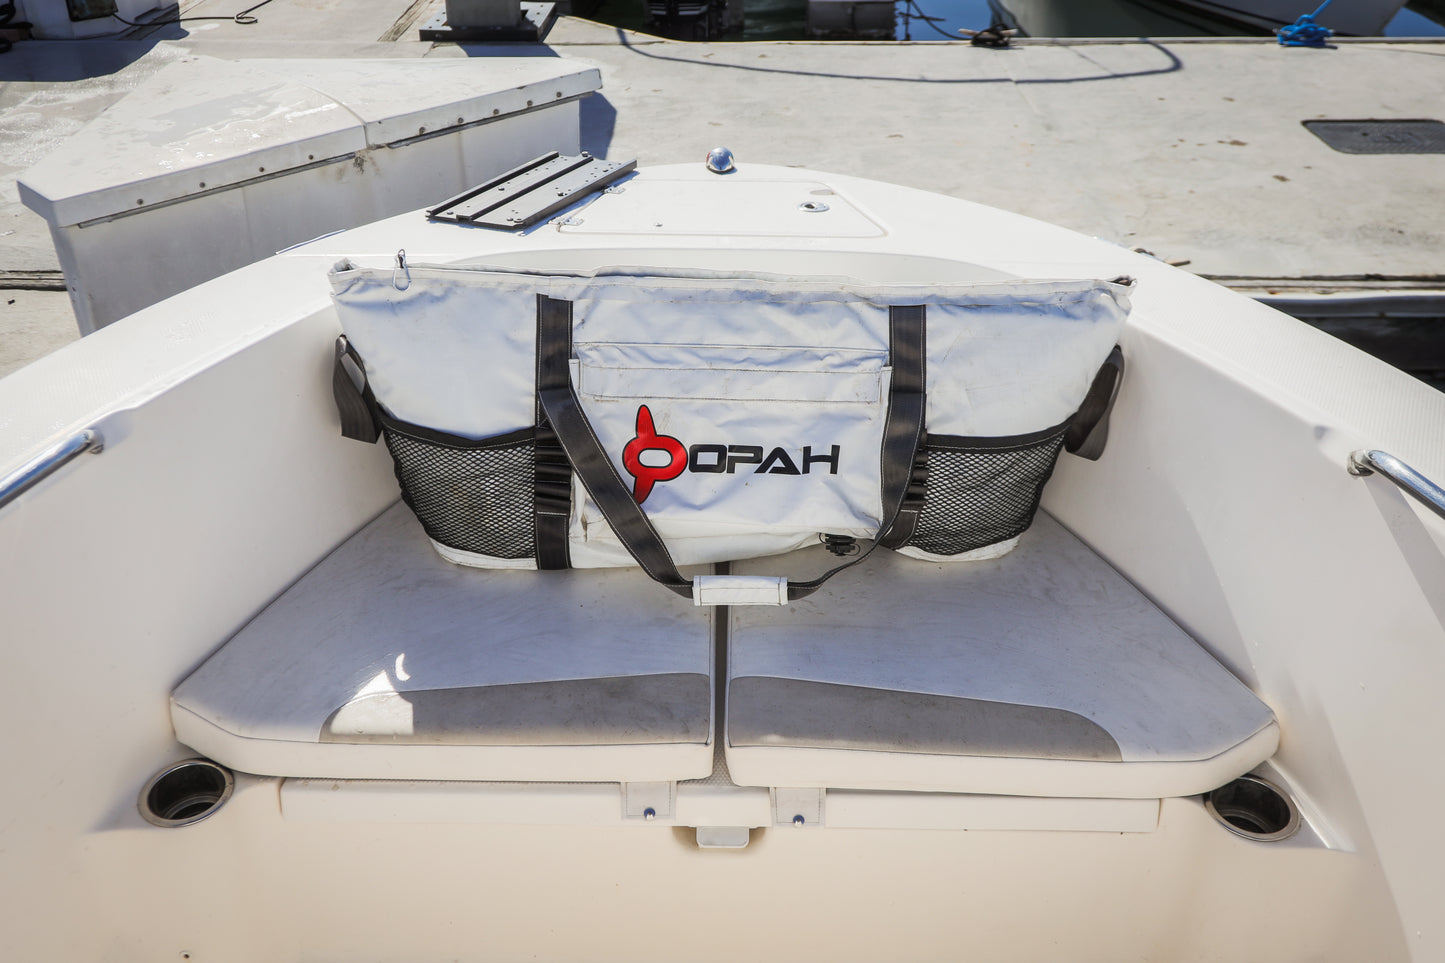 Opah Gear Fathom 4 Fish Cooler Bag Kill Bag. Protect your catch longer. The most reliable fish bag on the market. Purposely built to be the highest quality fish cooler bag in sportfishing. Even great when used as an insulated cooler bag while out camping or for other normal use. The highest quality insulated bag. A perfect Tuna Kill Bag, Dorado Kill bag, or yellowtail kill bag.